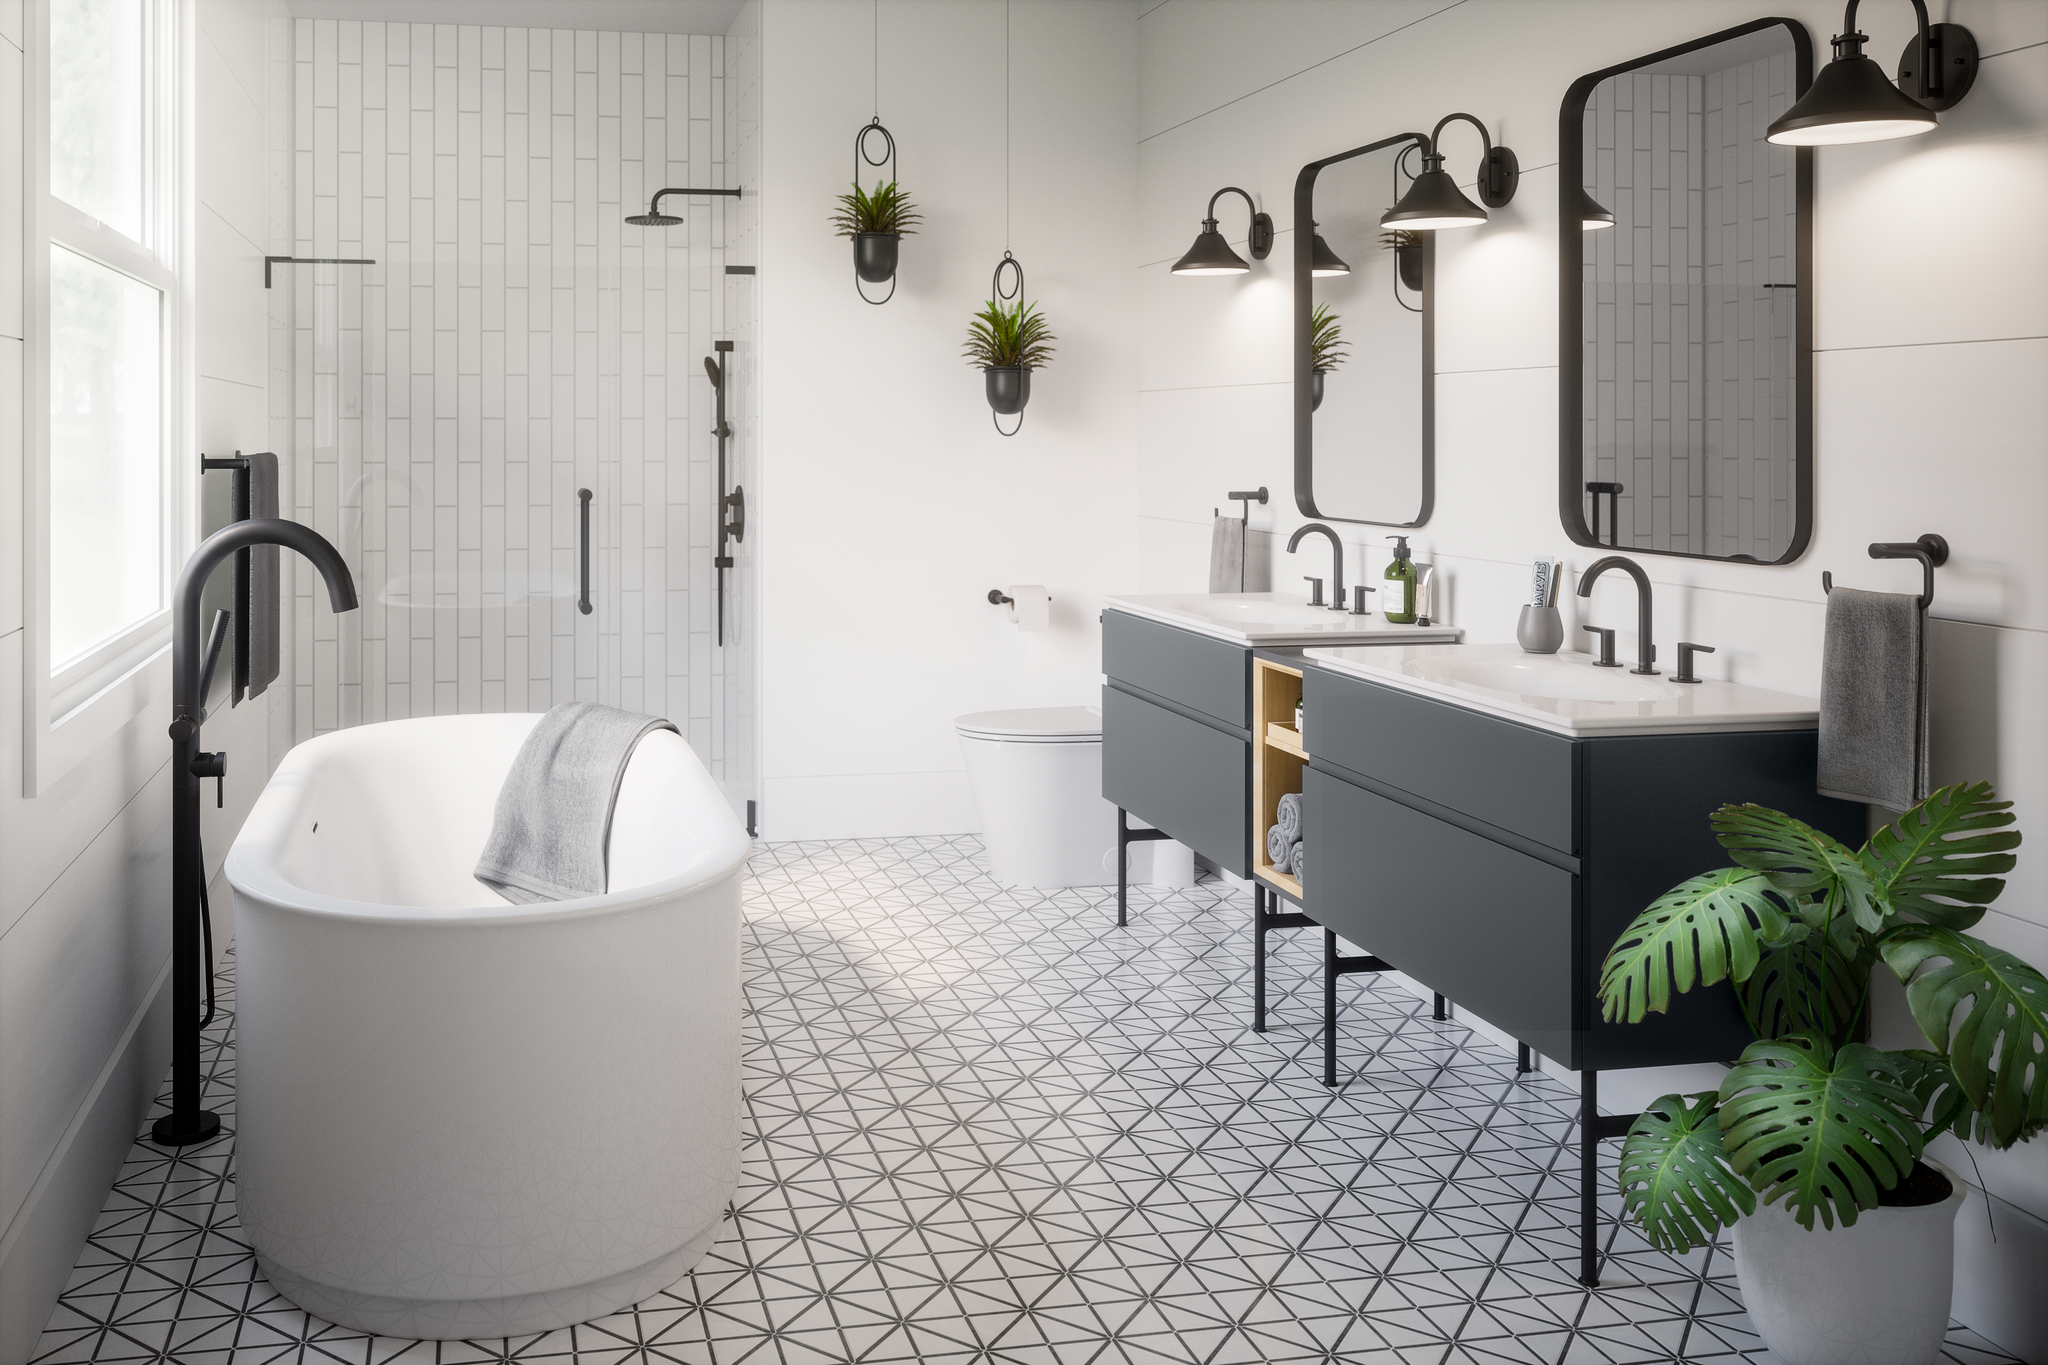 American Standard Expands its Modern Studio S Bathroom Collection